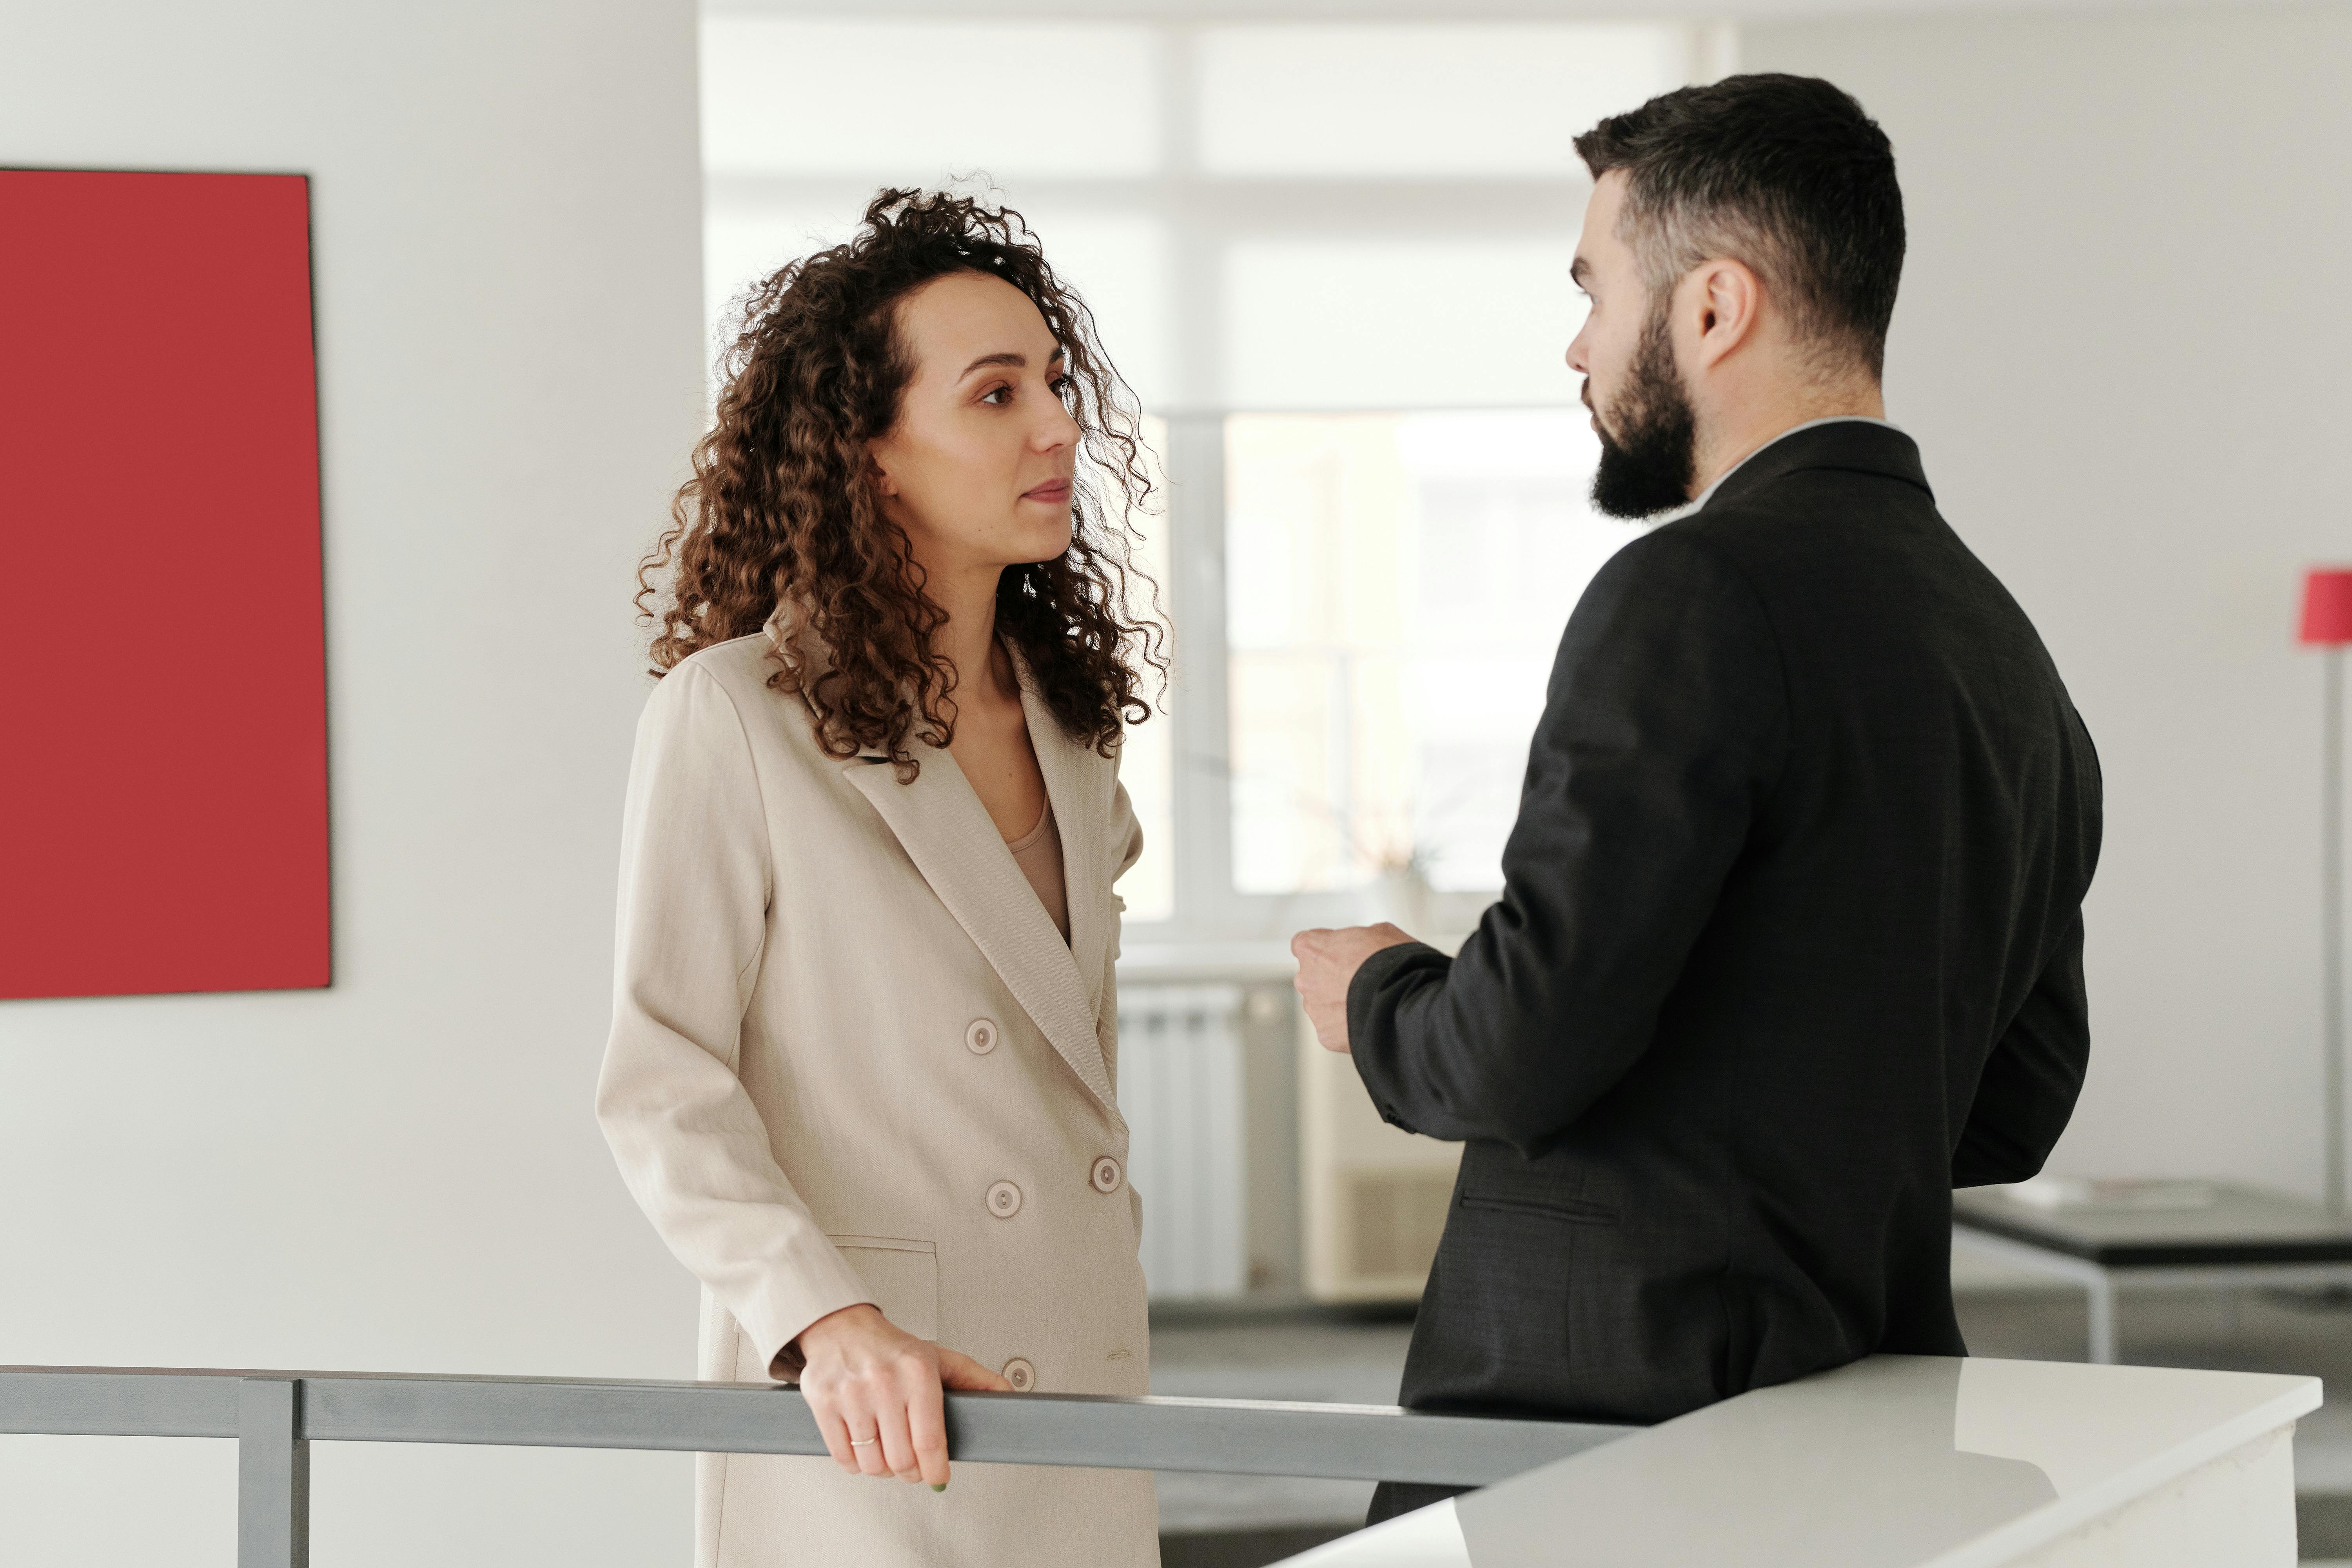 A man and woman having a serious conversation | Source: Pexels